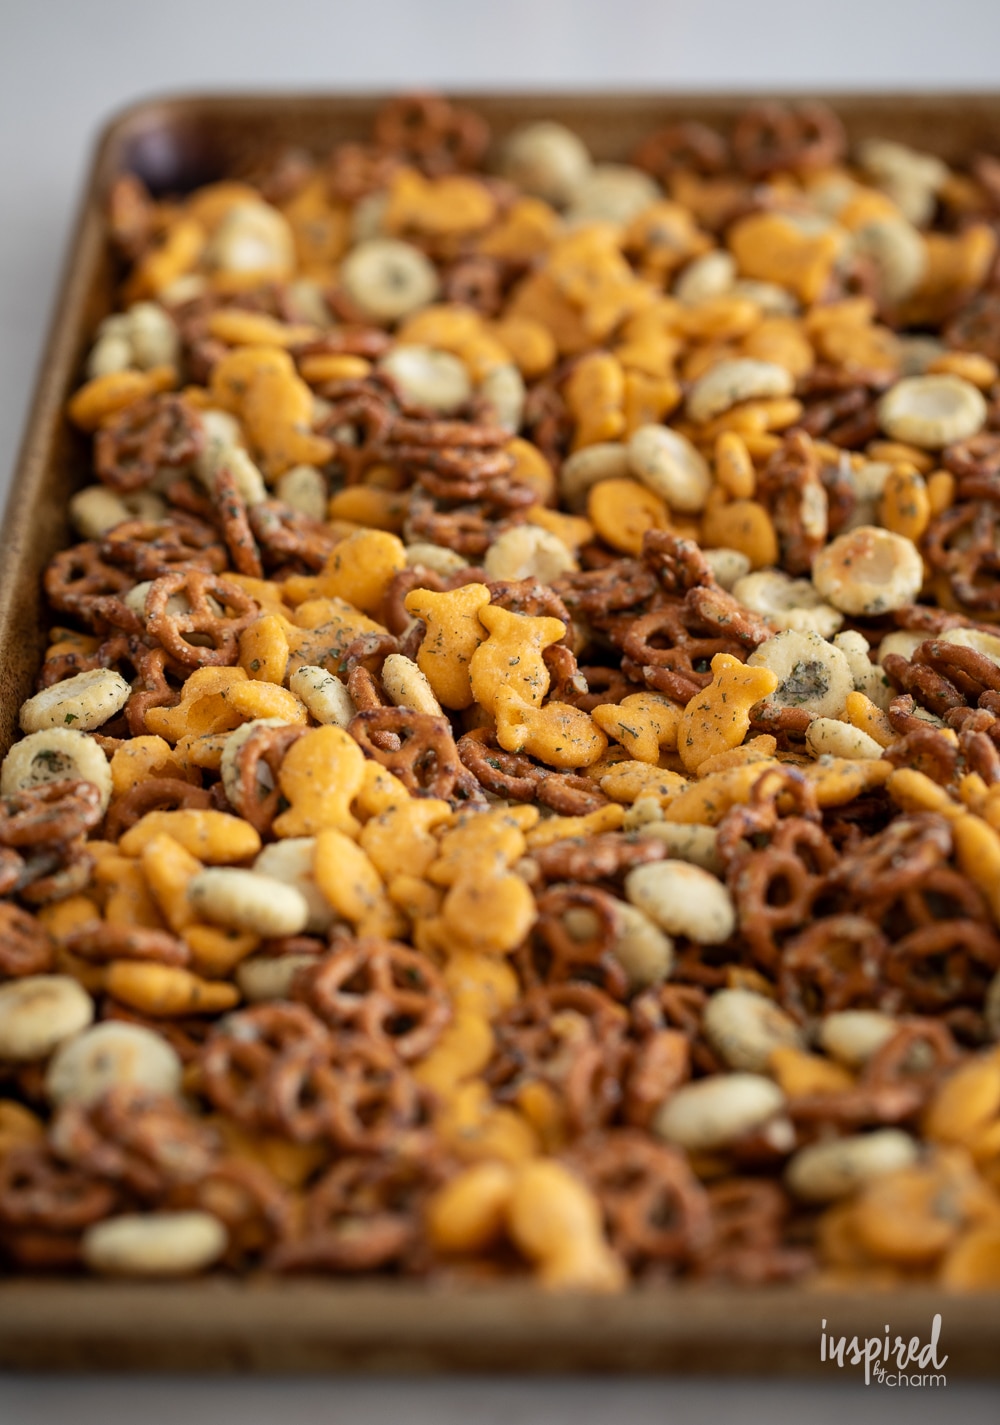 ranch pretzel snack mix spread out on a baking tray.